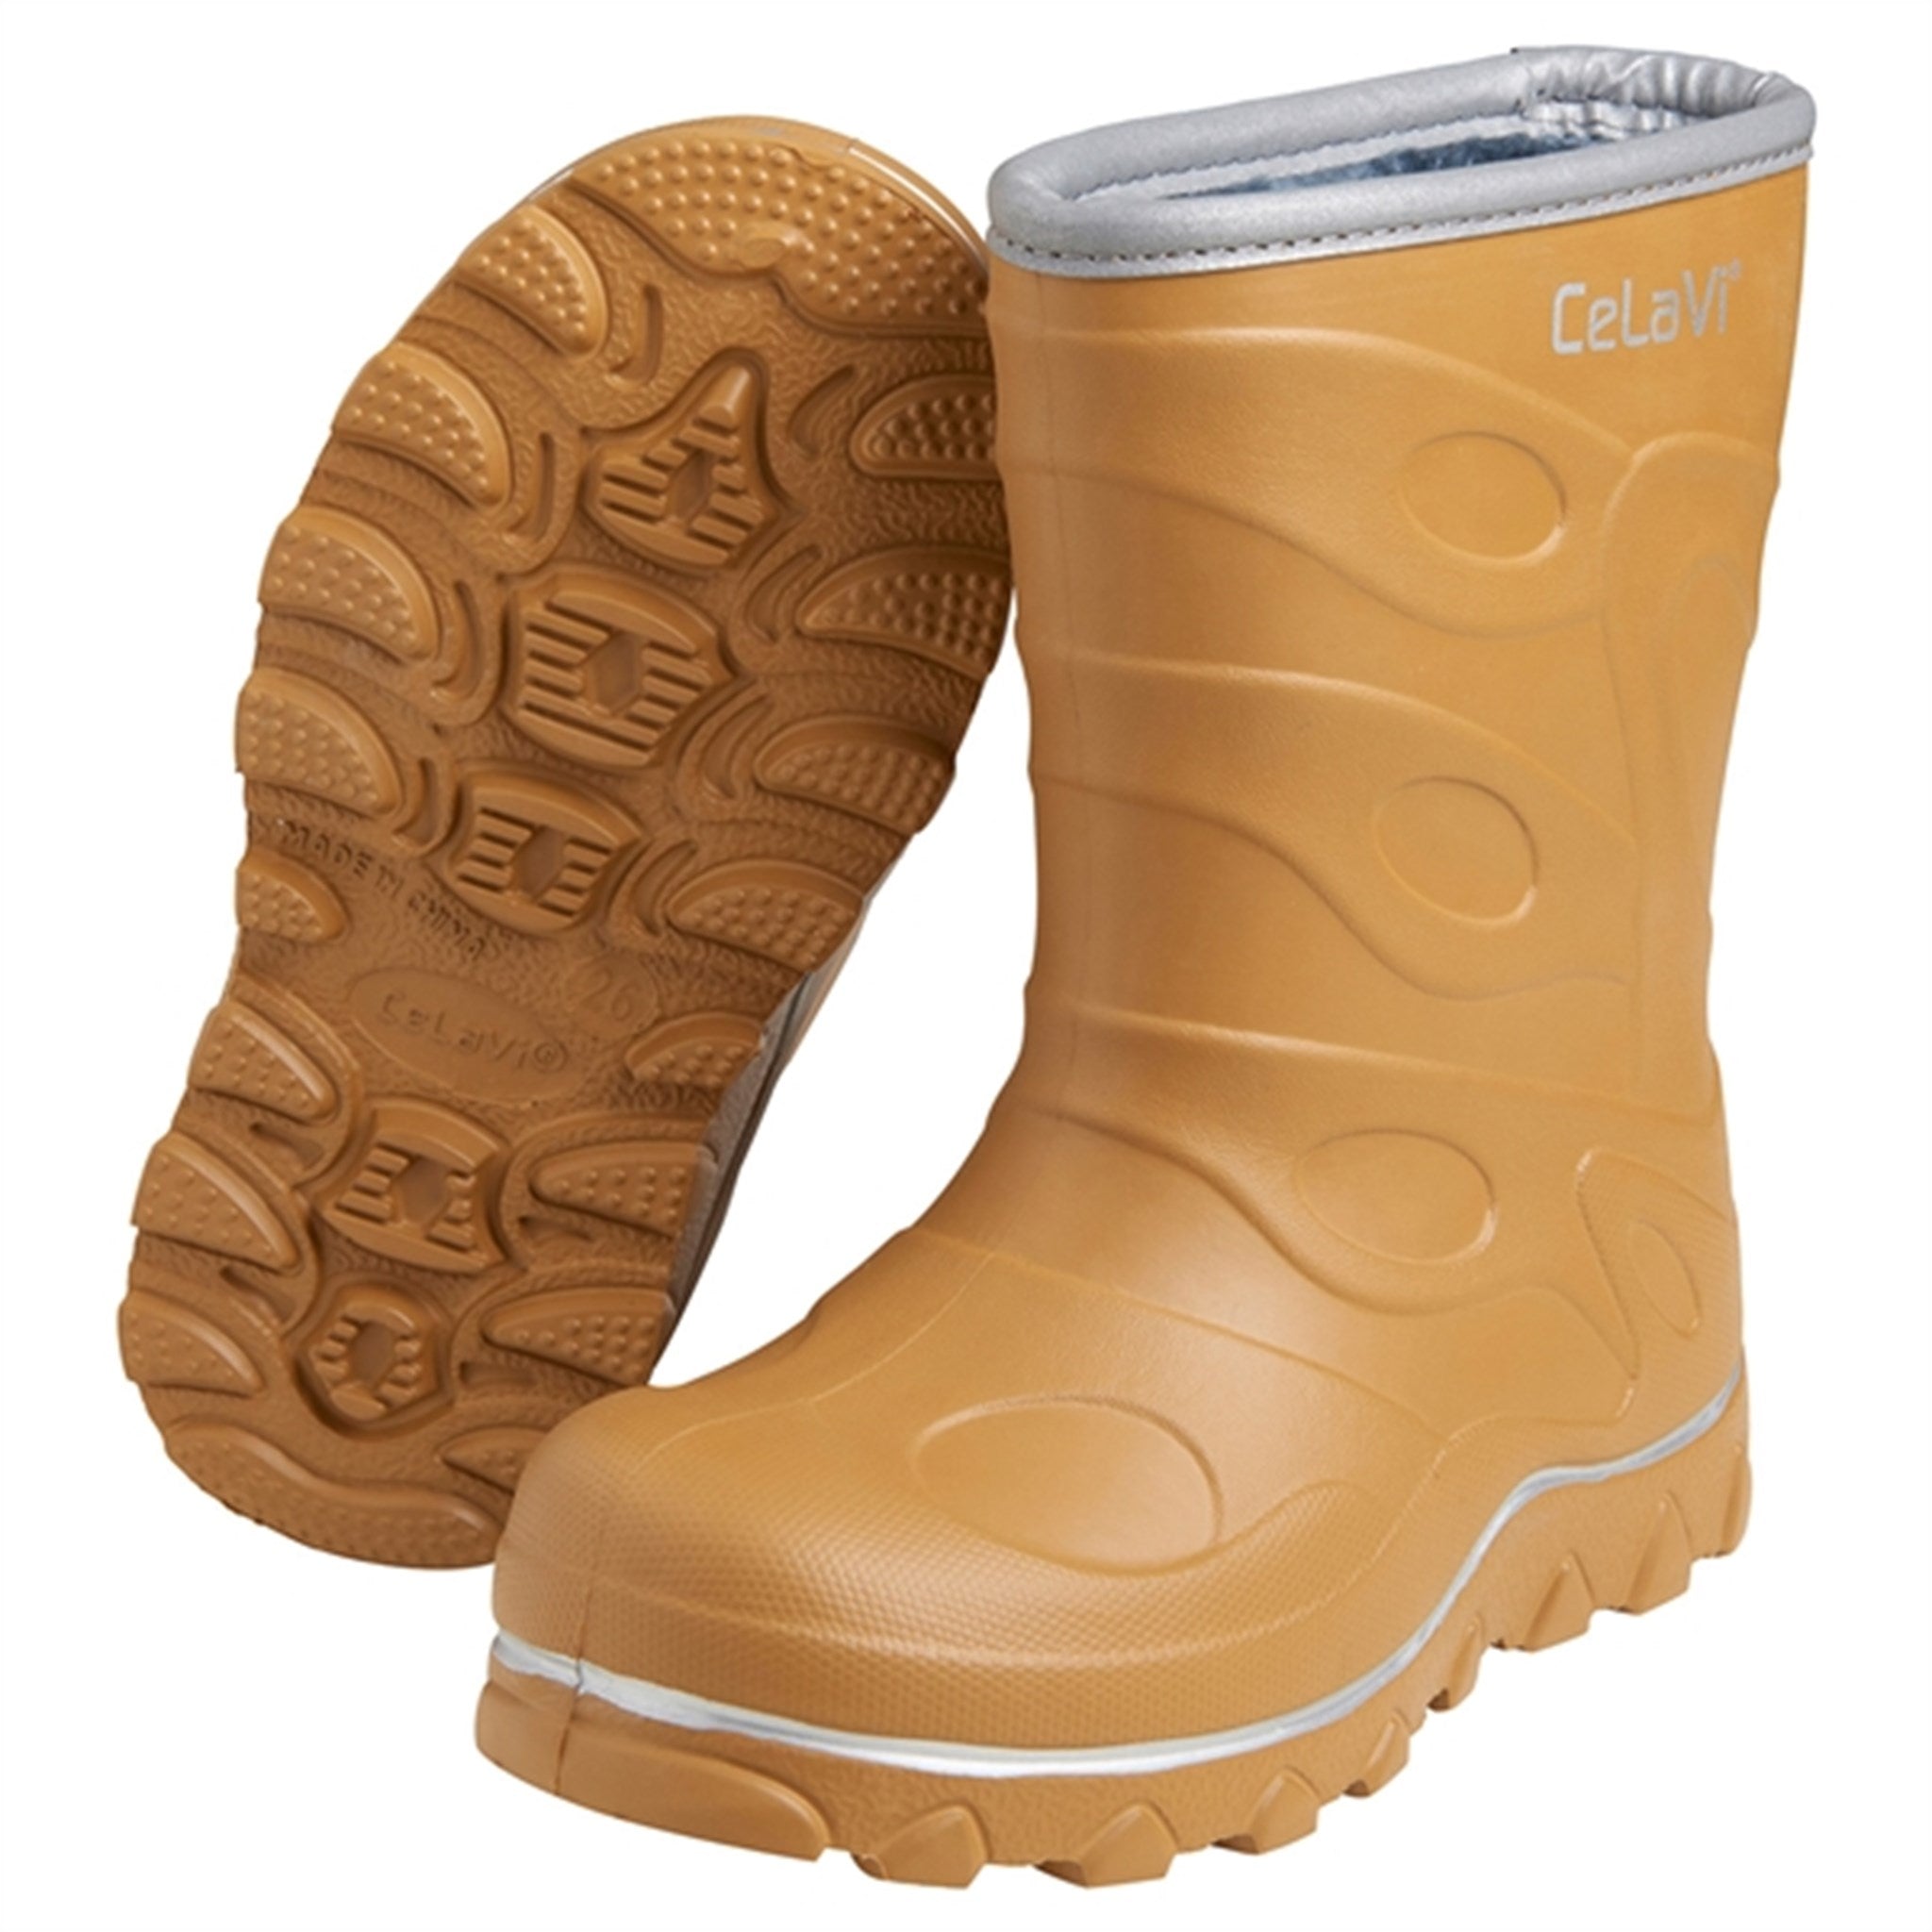 Celavi Thermo Boots Buckthorn Brown 2